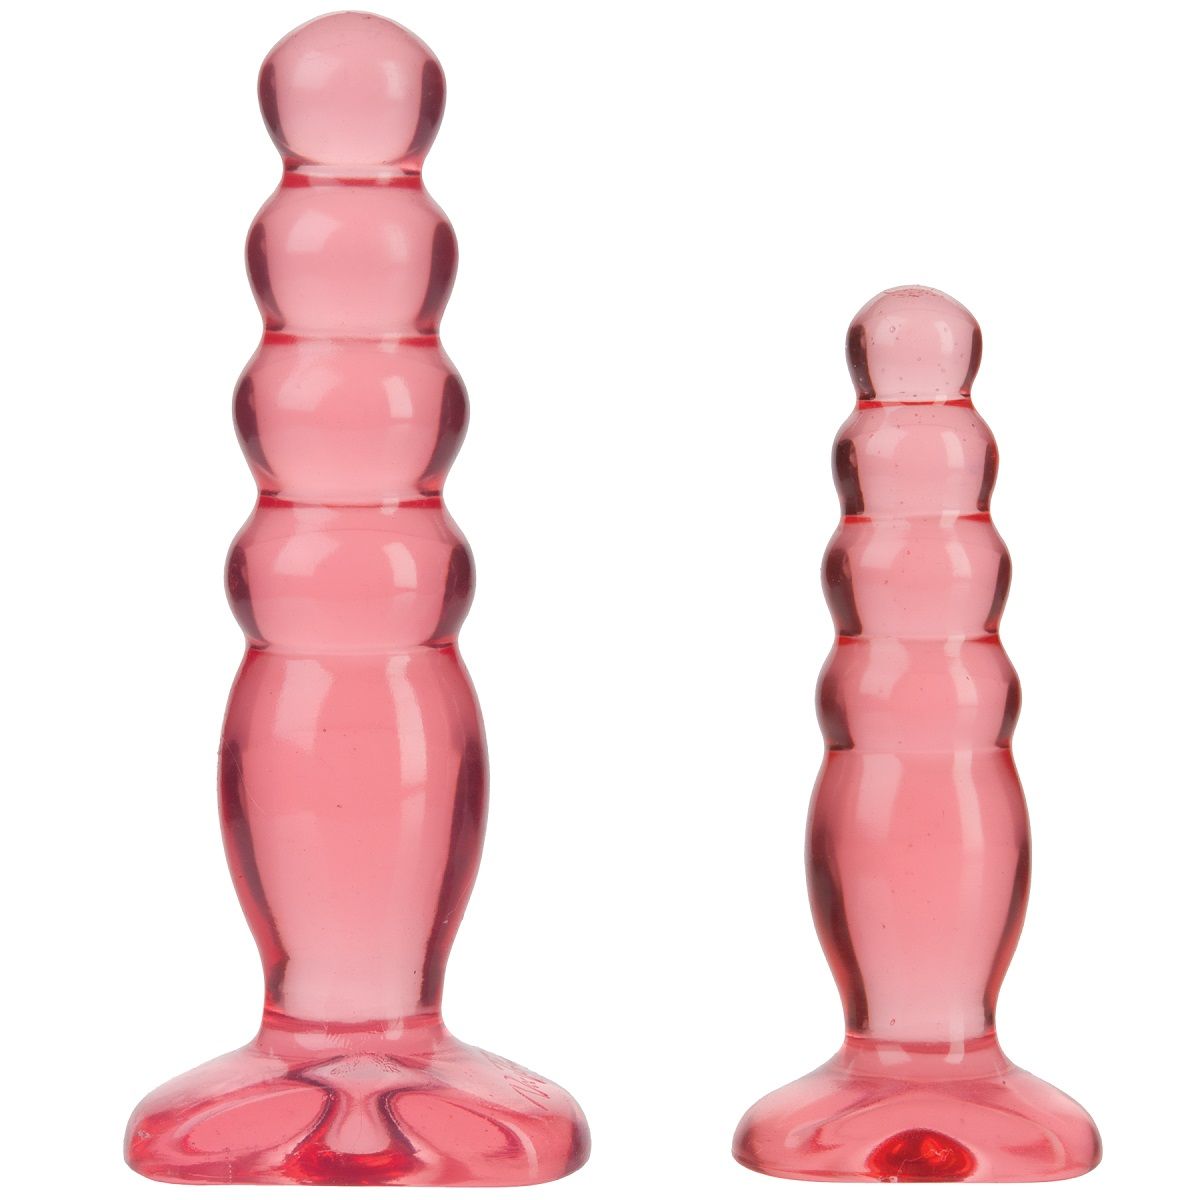       Crystal Jellies Anal Trainer Kit